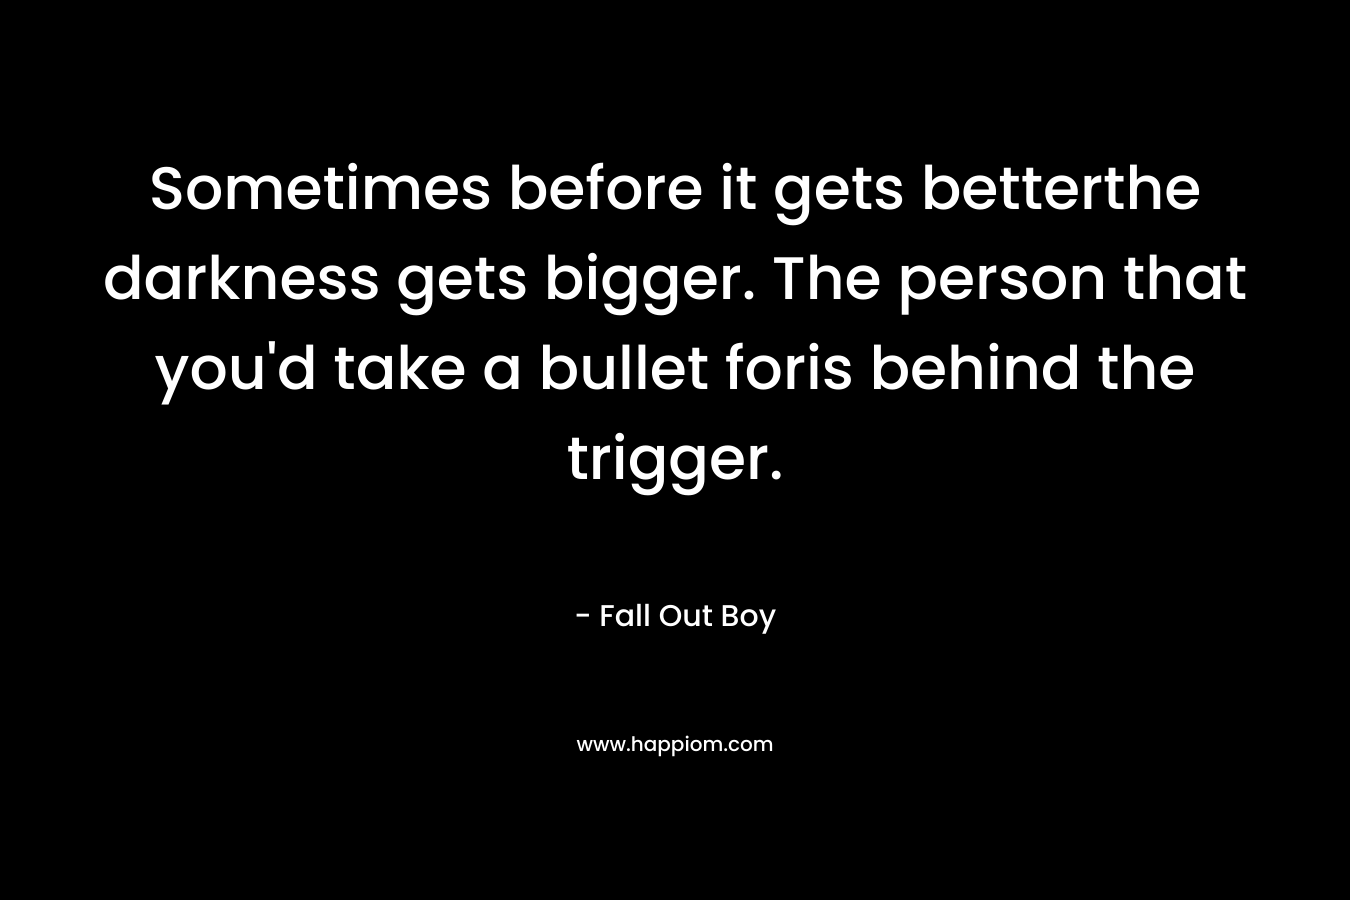 Sometimes before it gets betterthe darkness gets bigger. The person that you’d take a bullet foris behind the trigger. – Fall Out Boy